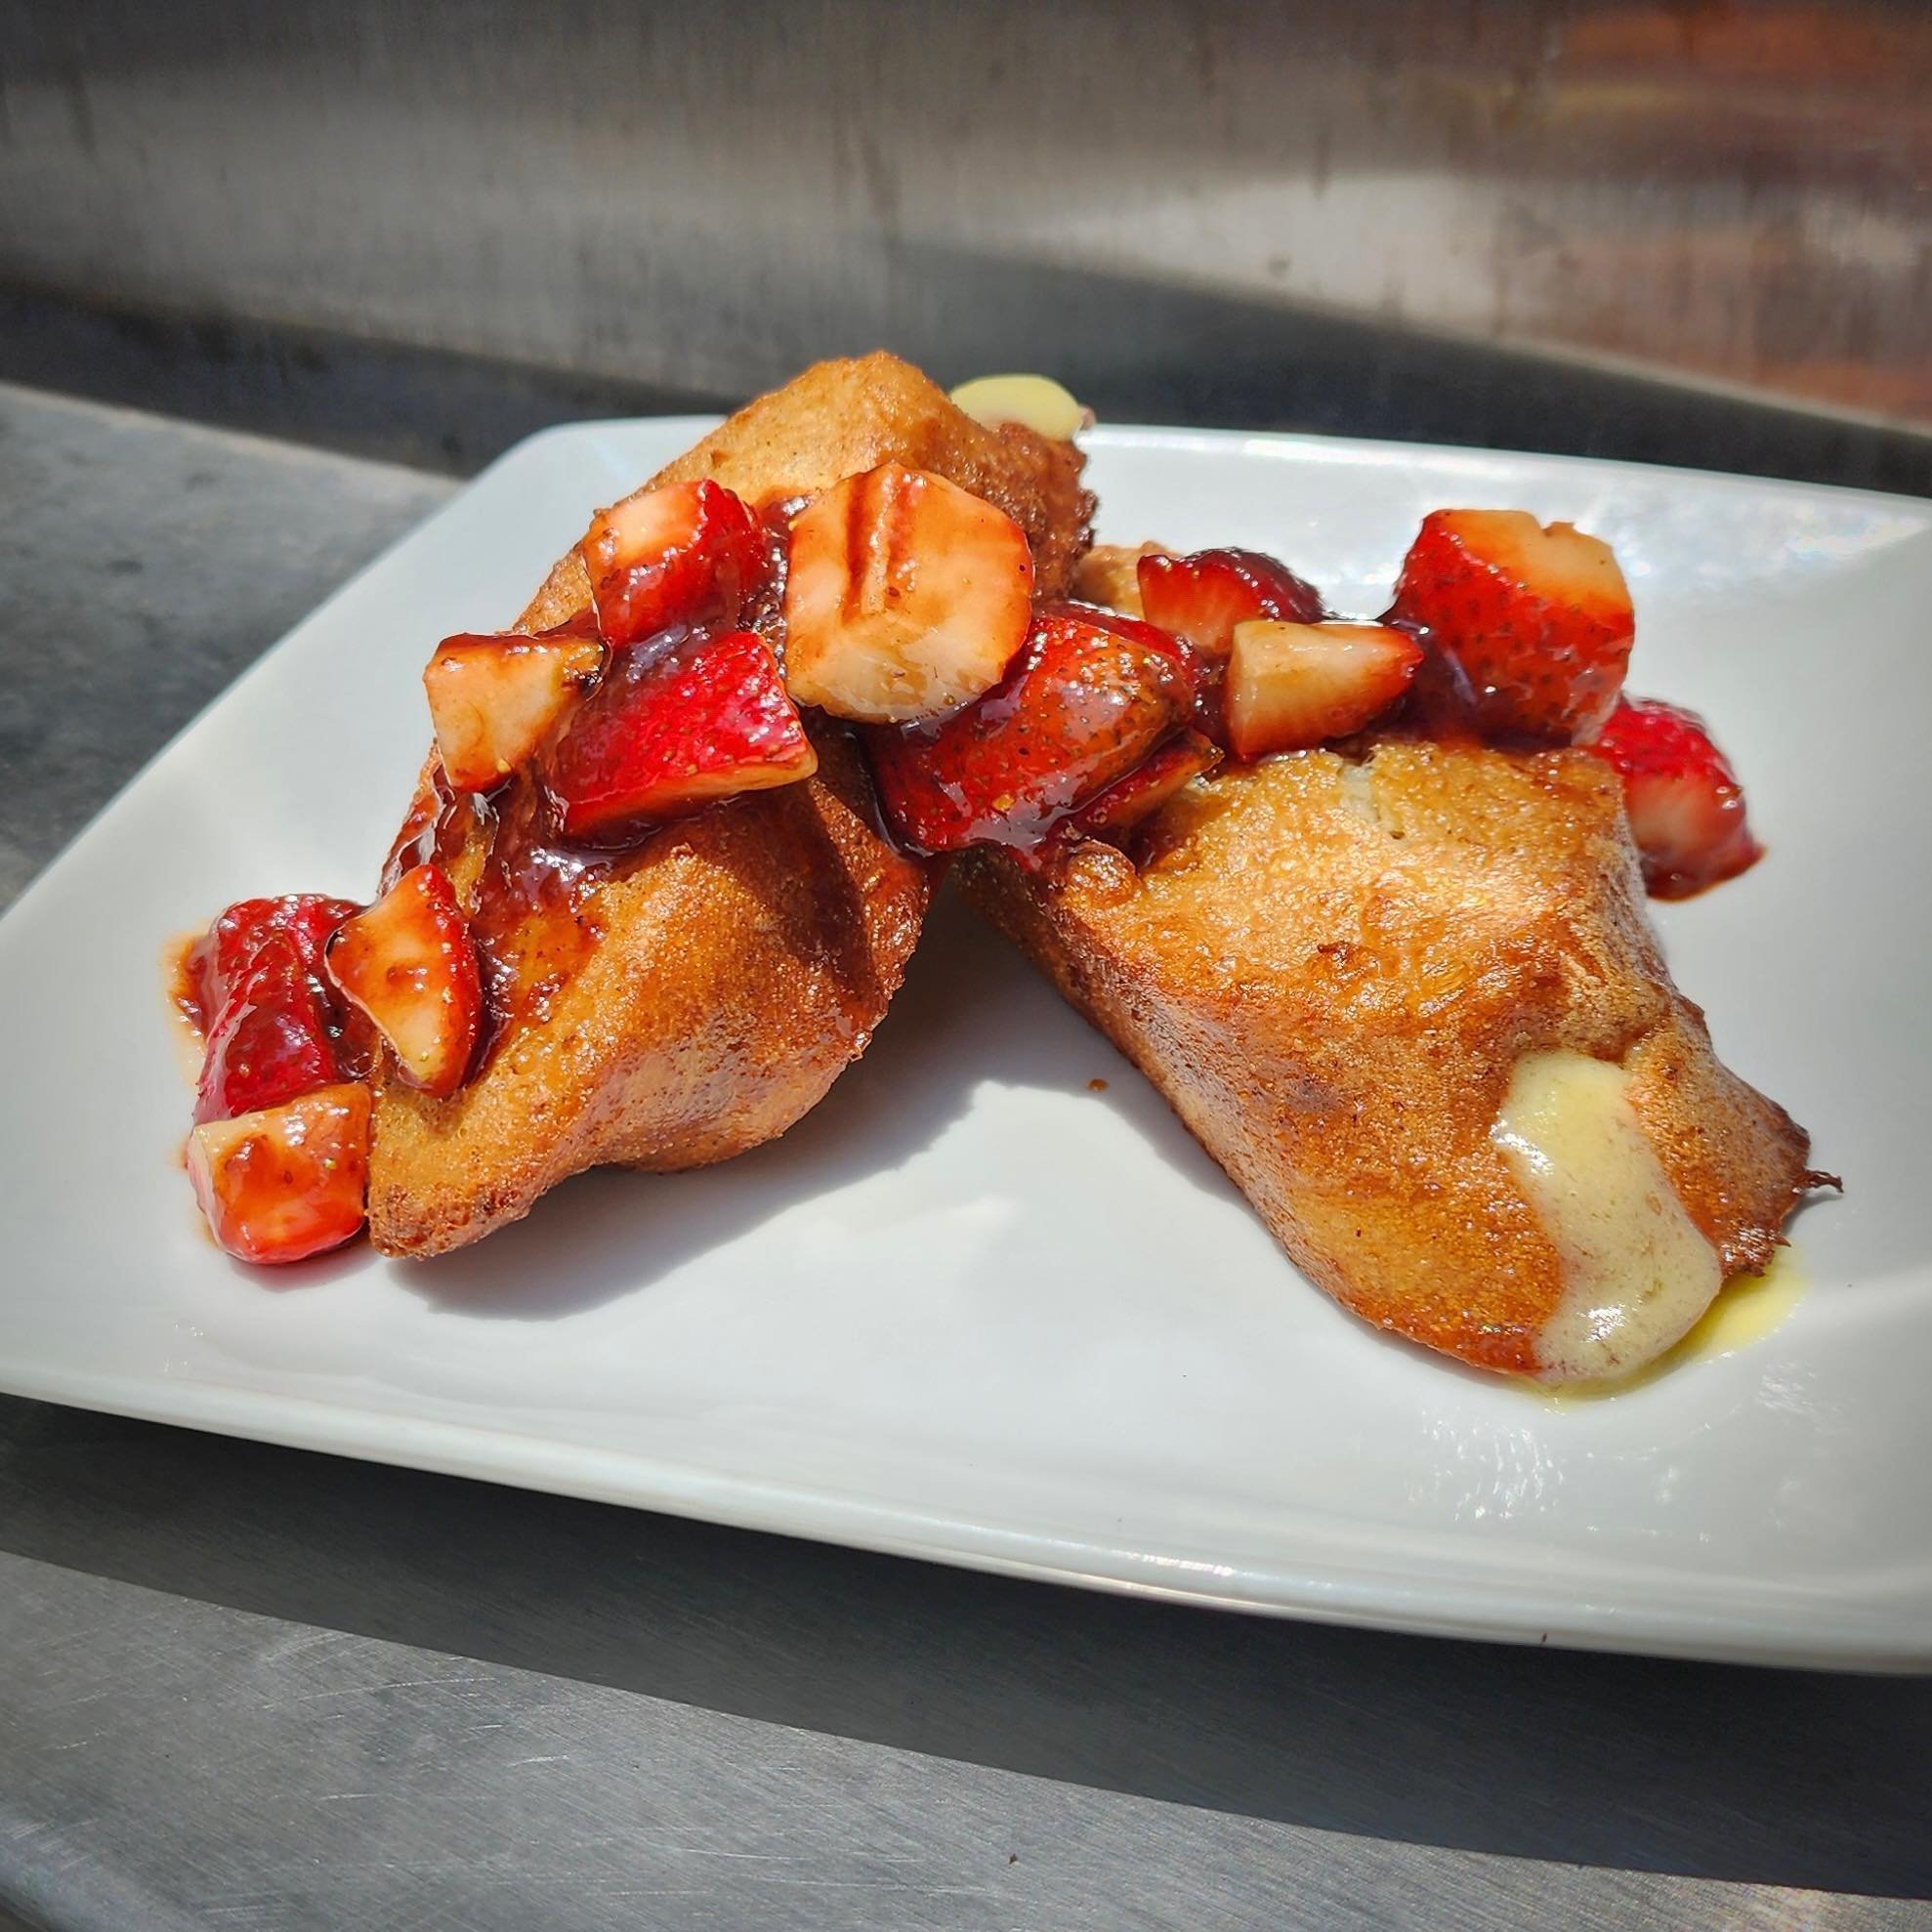 ✨Strawberry Lemonade French Toast✨
Little known fact: All moms love strawberry lemonade&hellip;or that&rsquo;s what our mothers told us and we are running with it! Our French toast stuffed with lemon curd and topped with a strawberry citrus jam 🍓🍋 